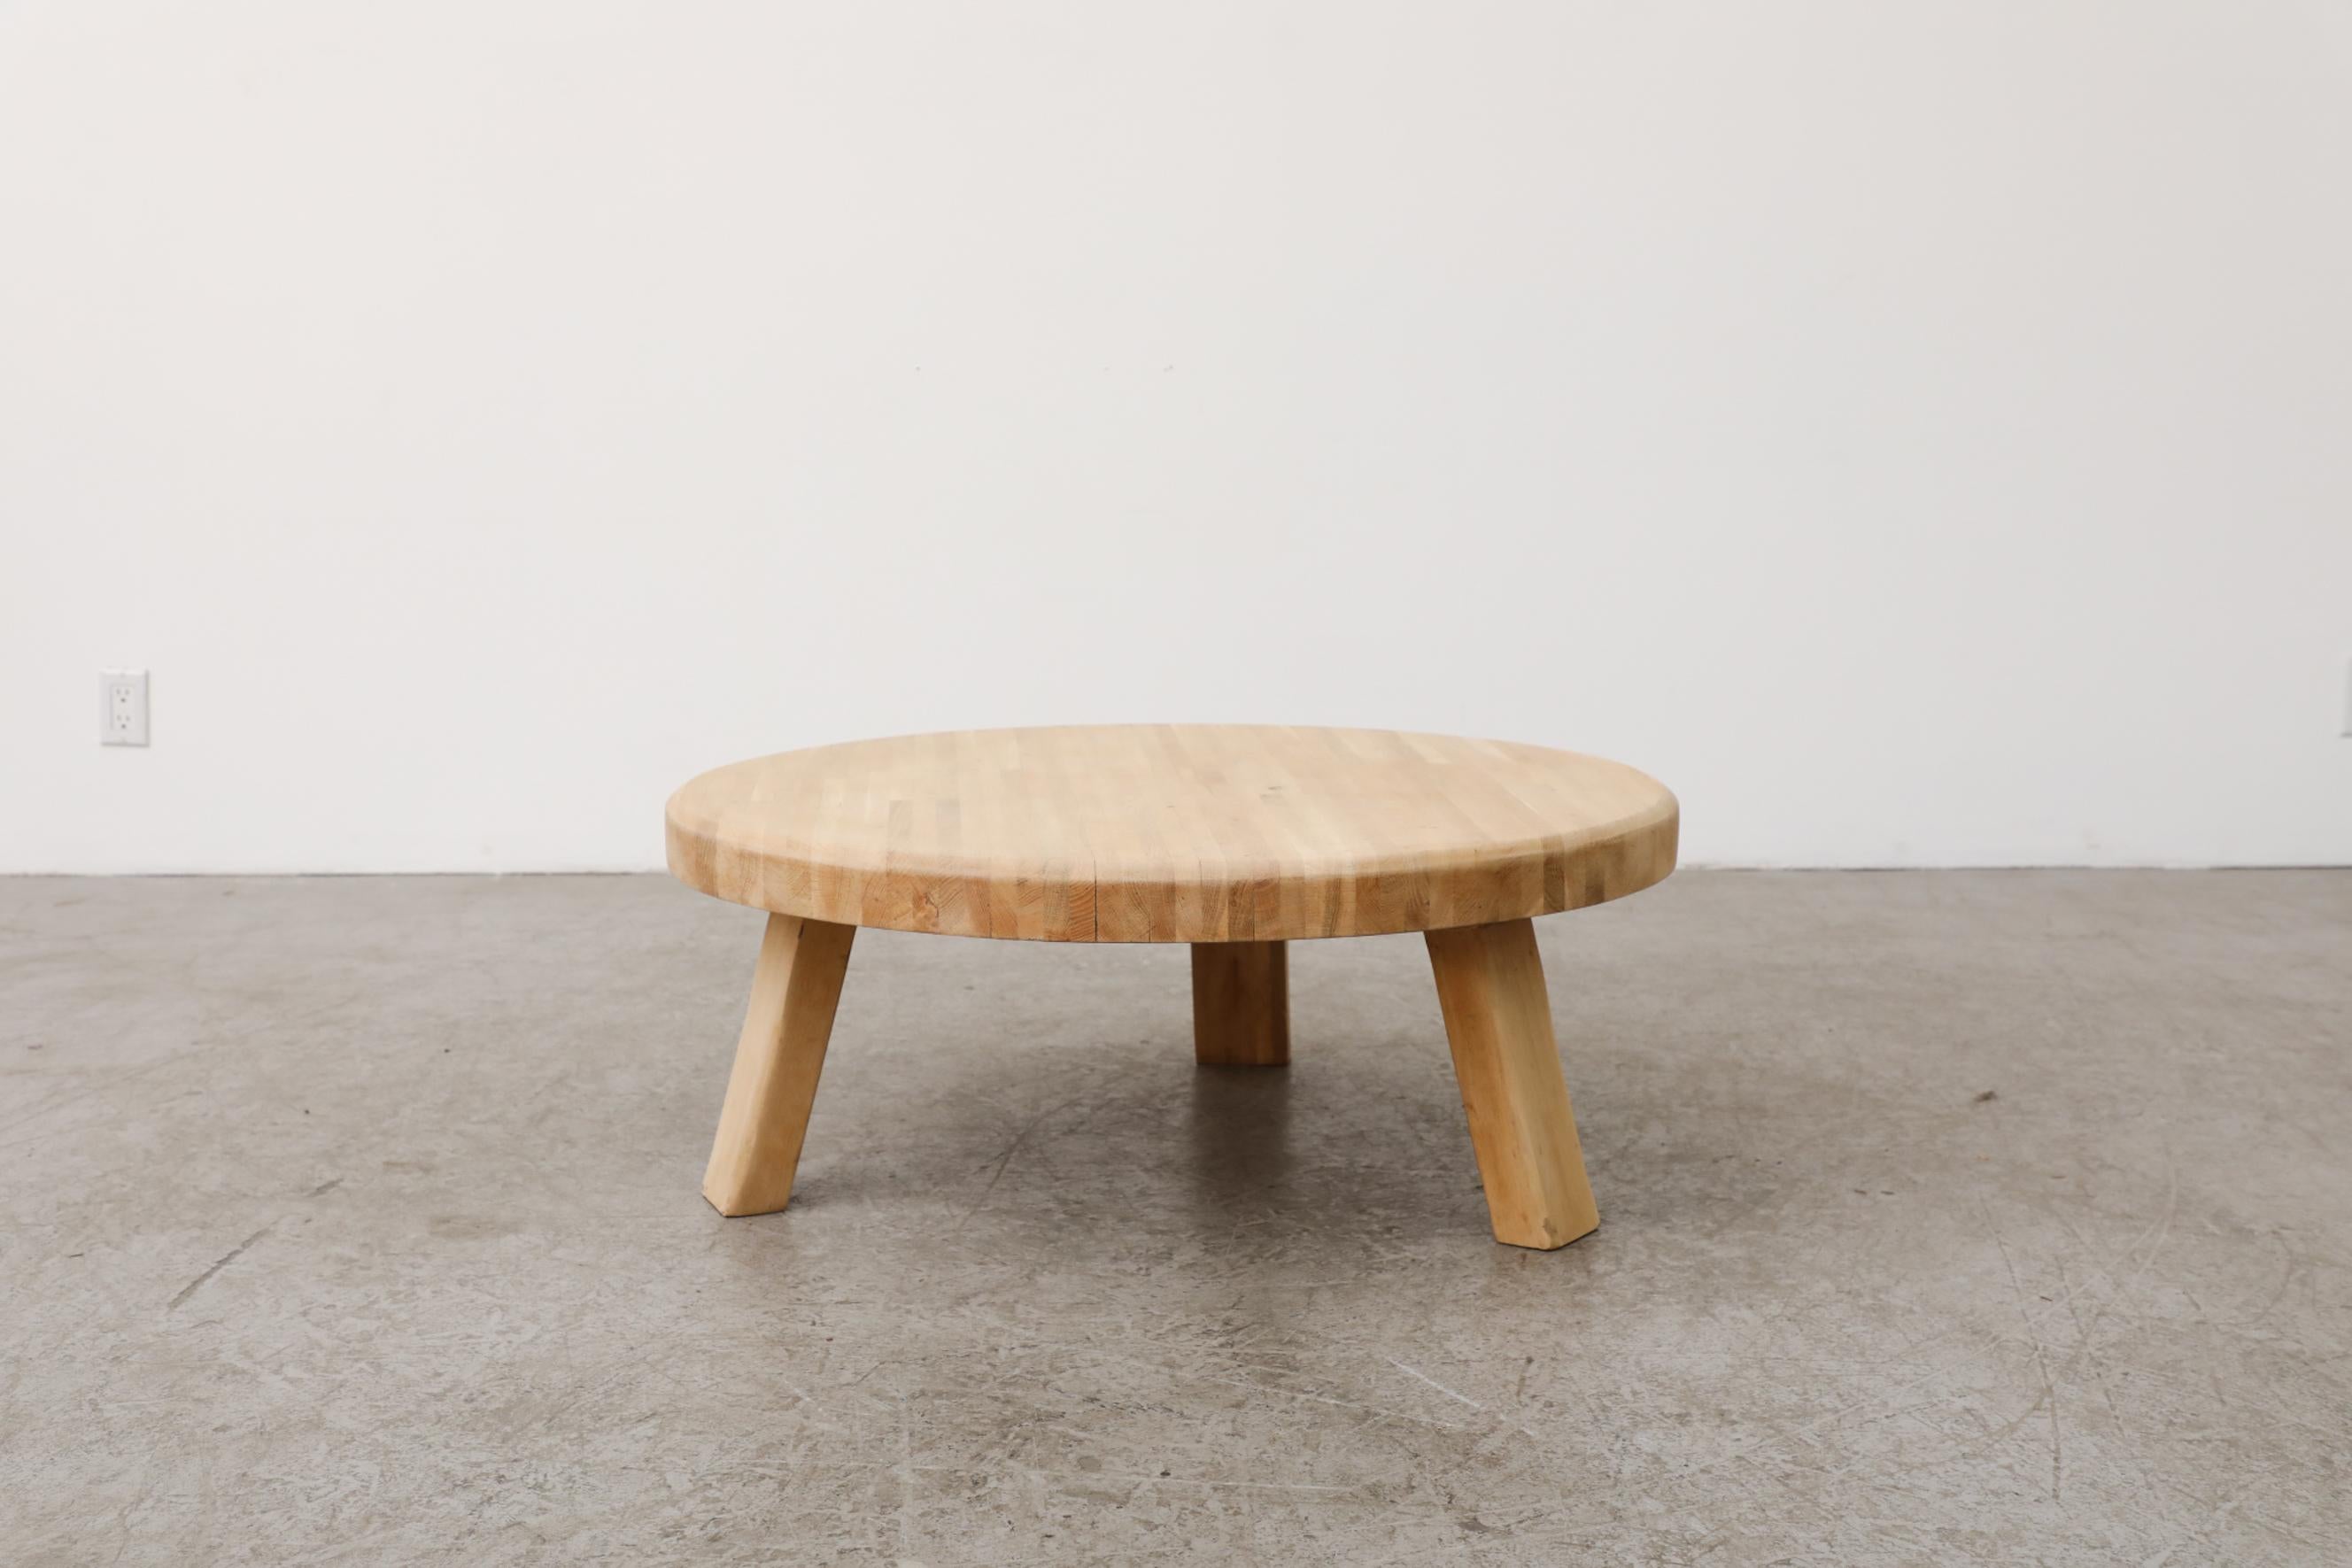 This stunning, Brutalist heavy round coffee made from solid oak with three sturdy square legs is in original condition with visible wear and patina consistent with its age and use.